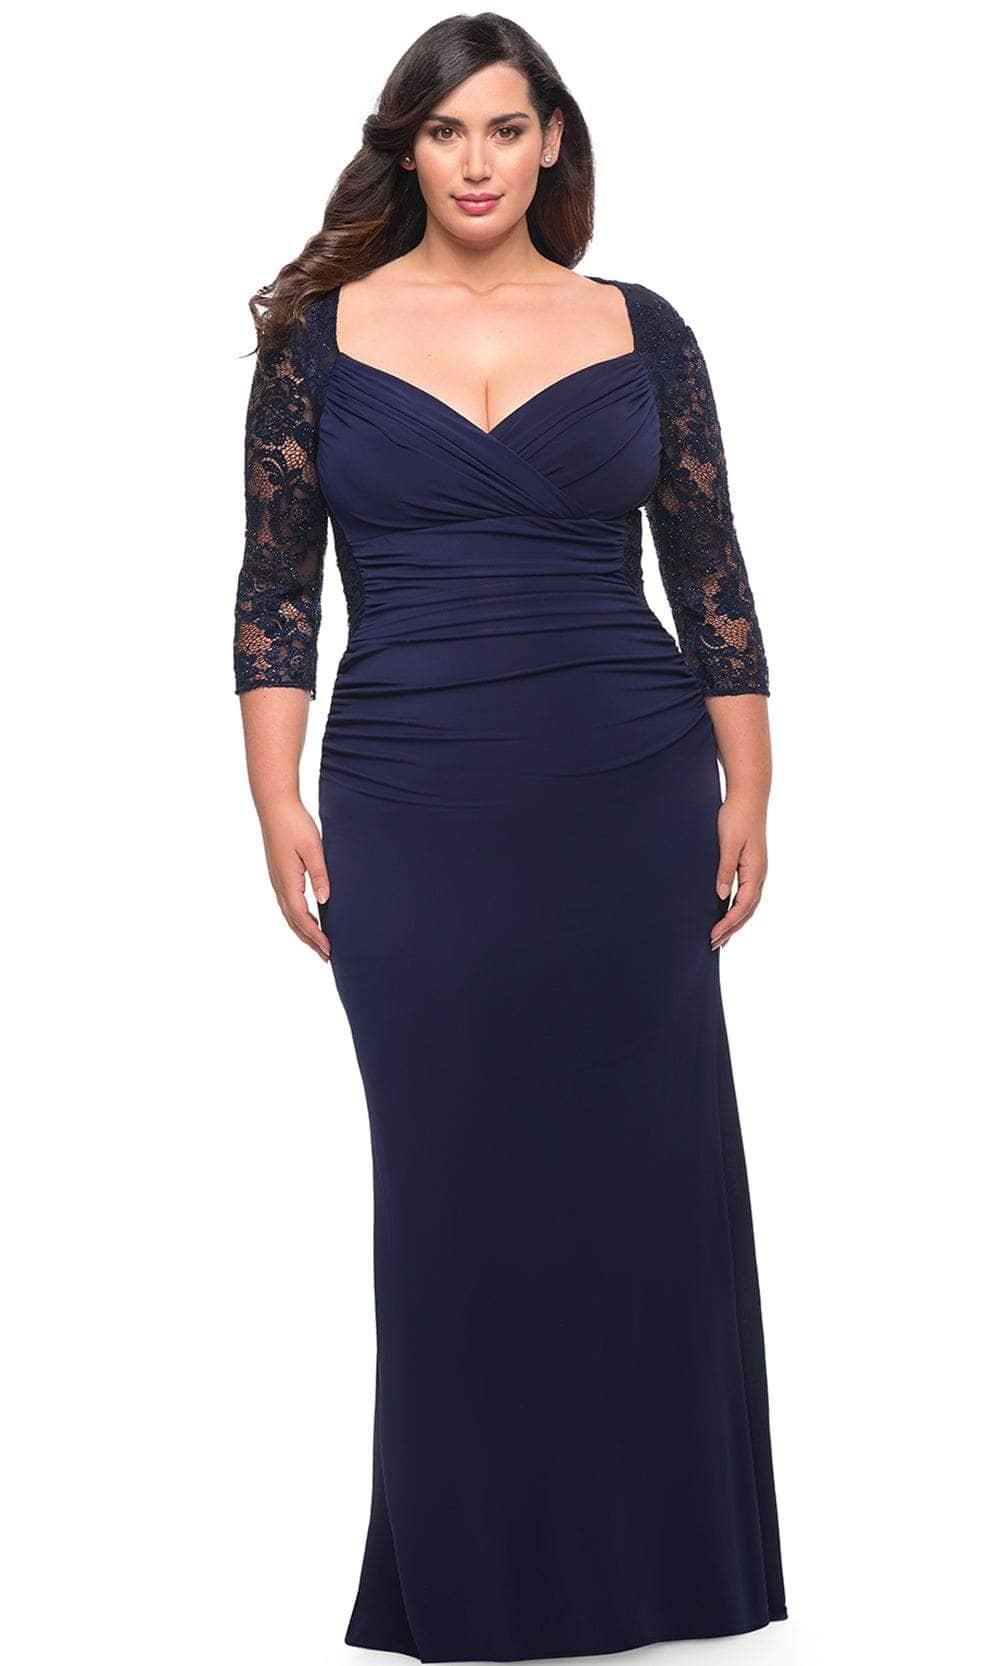 La Femme 29586 - Laced Sleeve Formal Dress Special Occasion Dress 12W / Navy